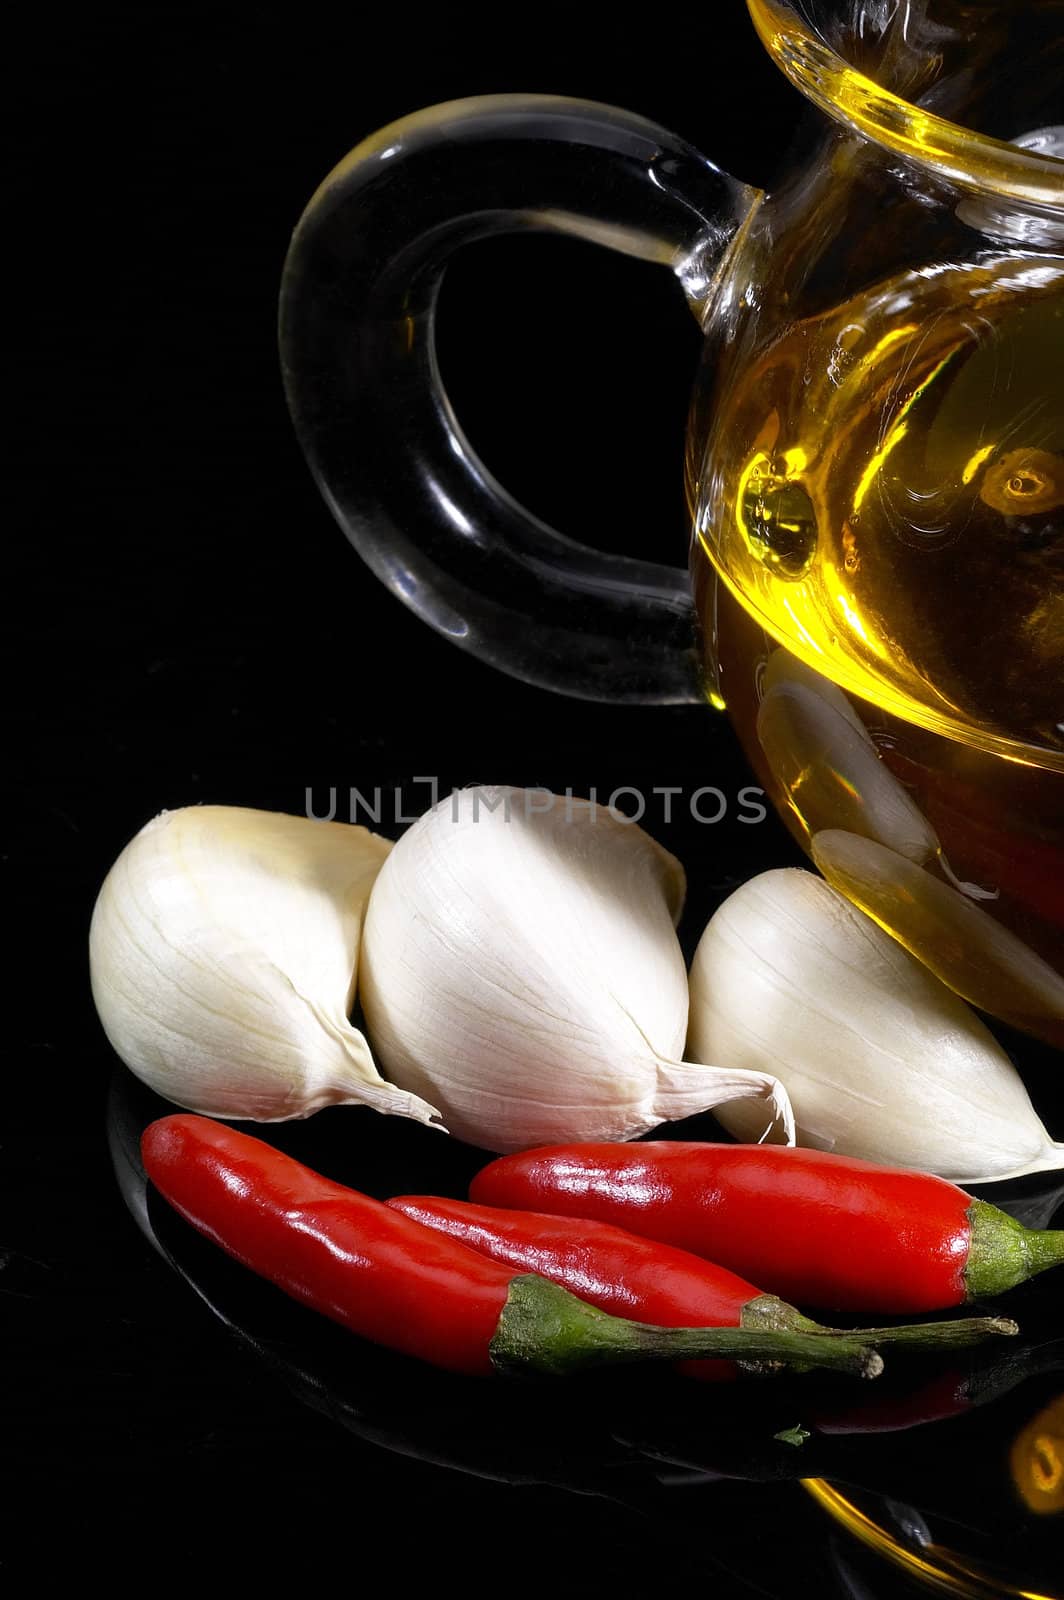 garlic olive oil and red chili pepper